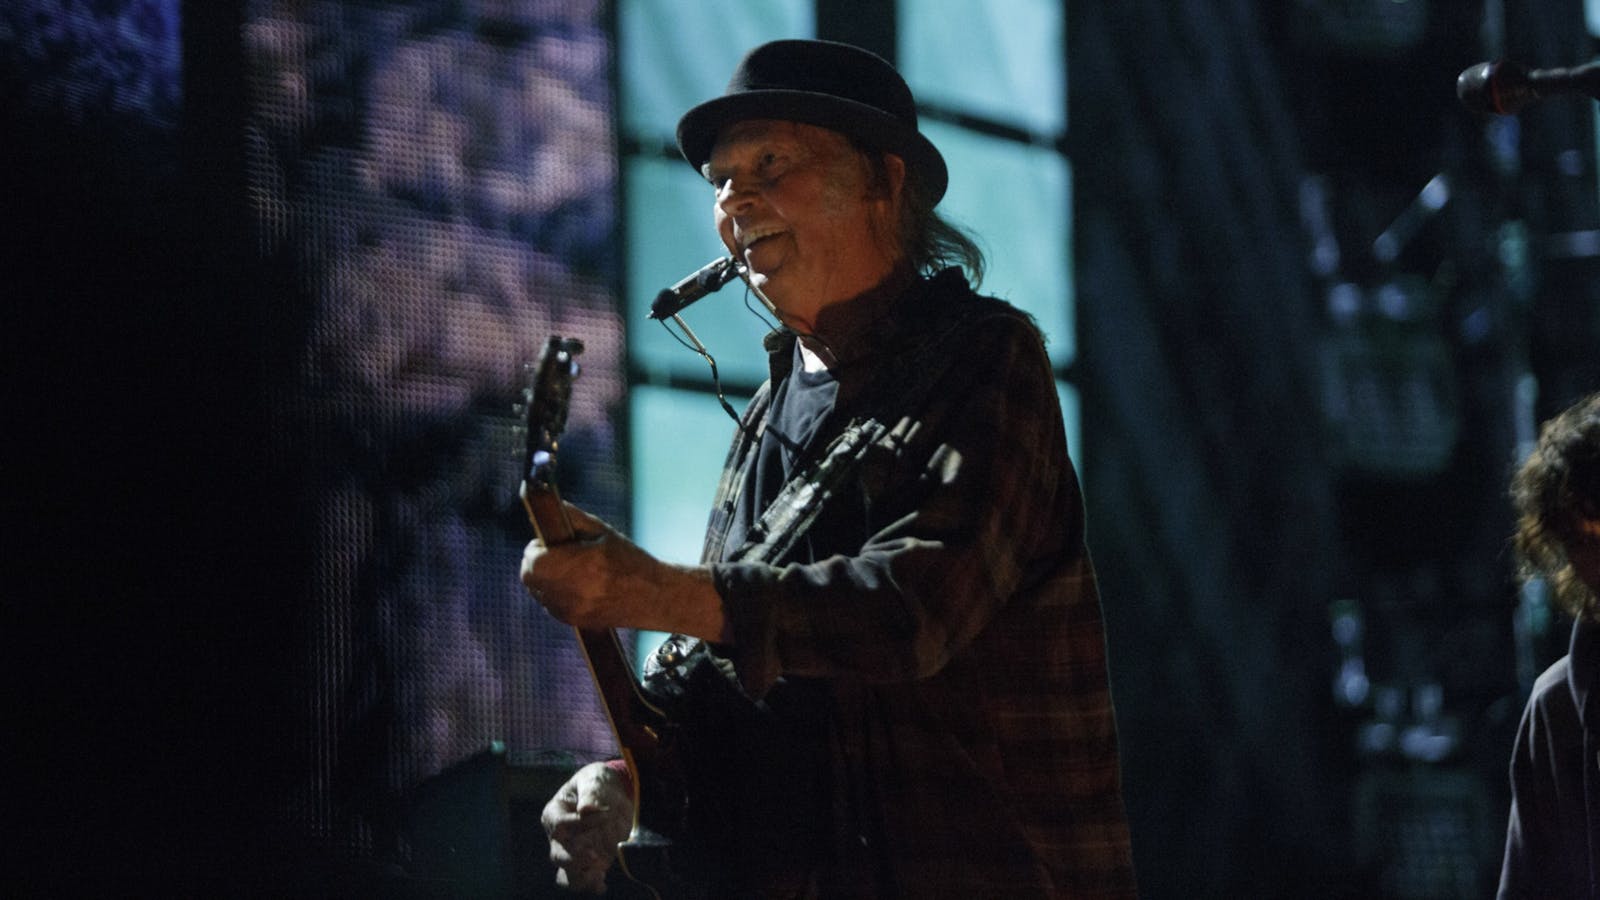 Neil Young. Photo by Bloomberg.